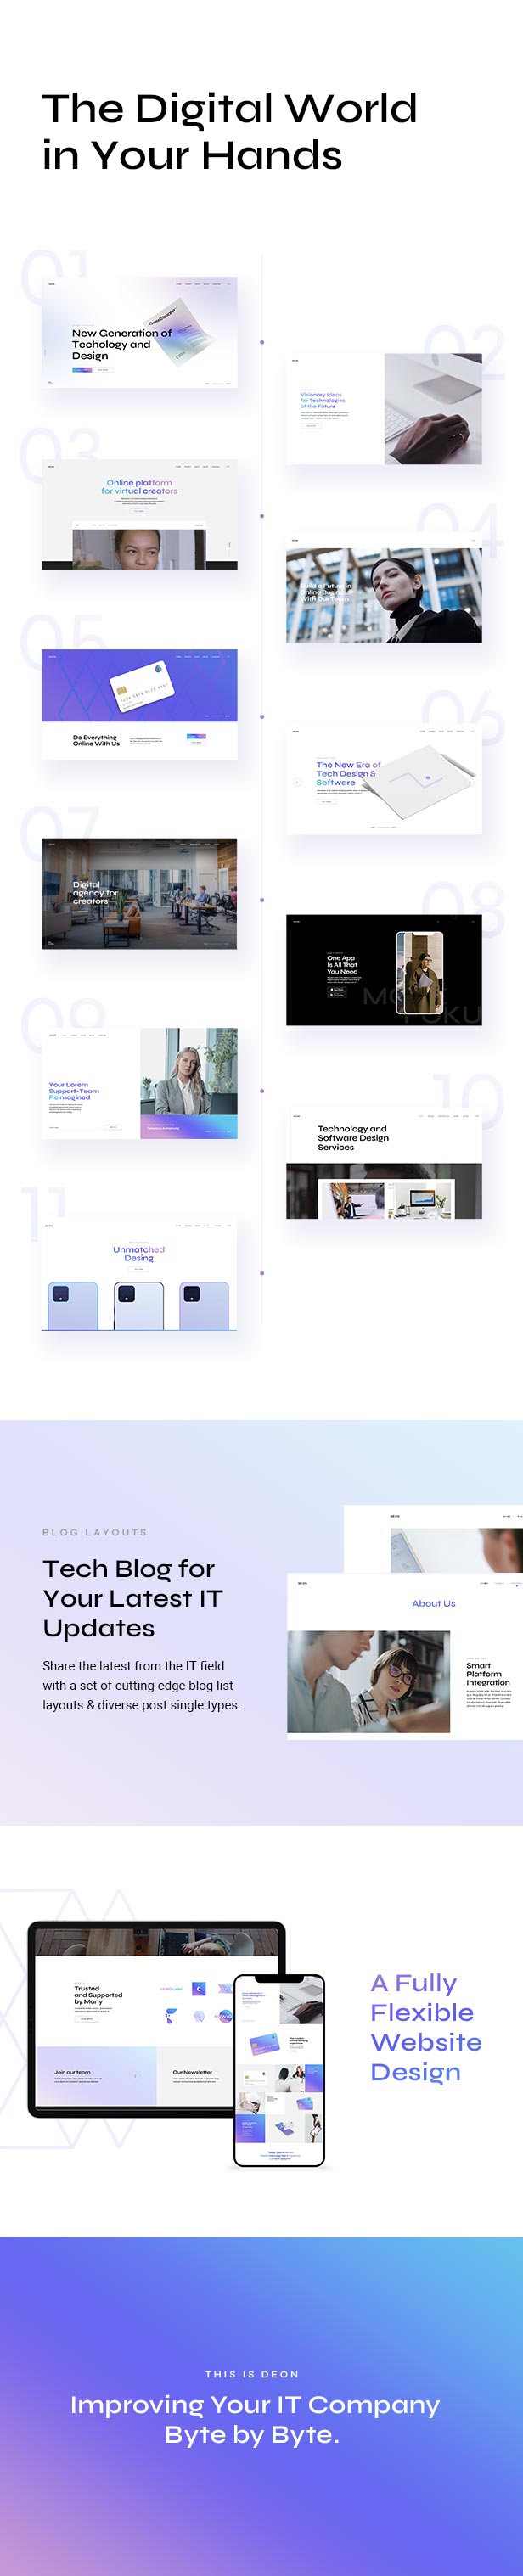 Deon - Technology and Software Company Theme - 2